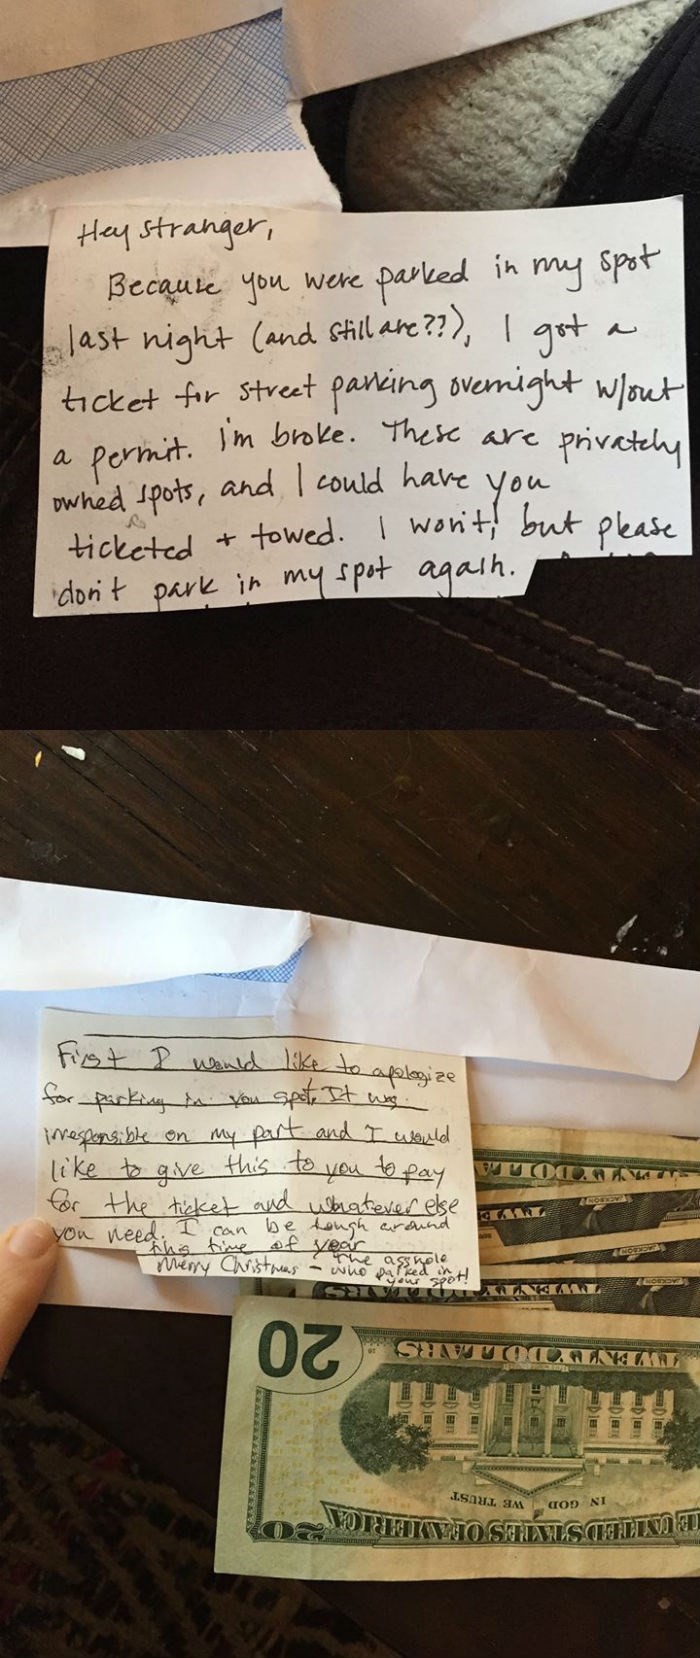 win stranger doesn't tow car and guy returns kindness by paying parking ticket